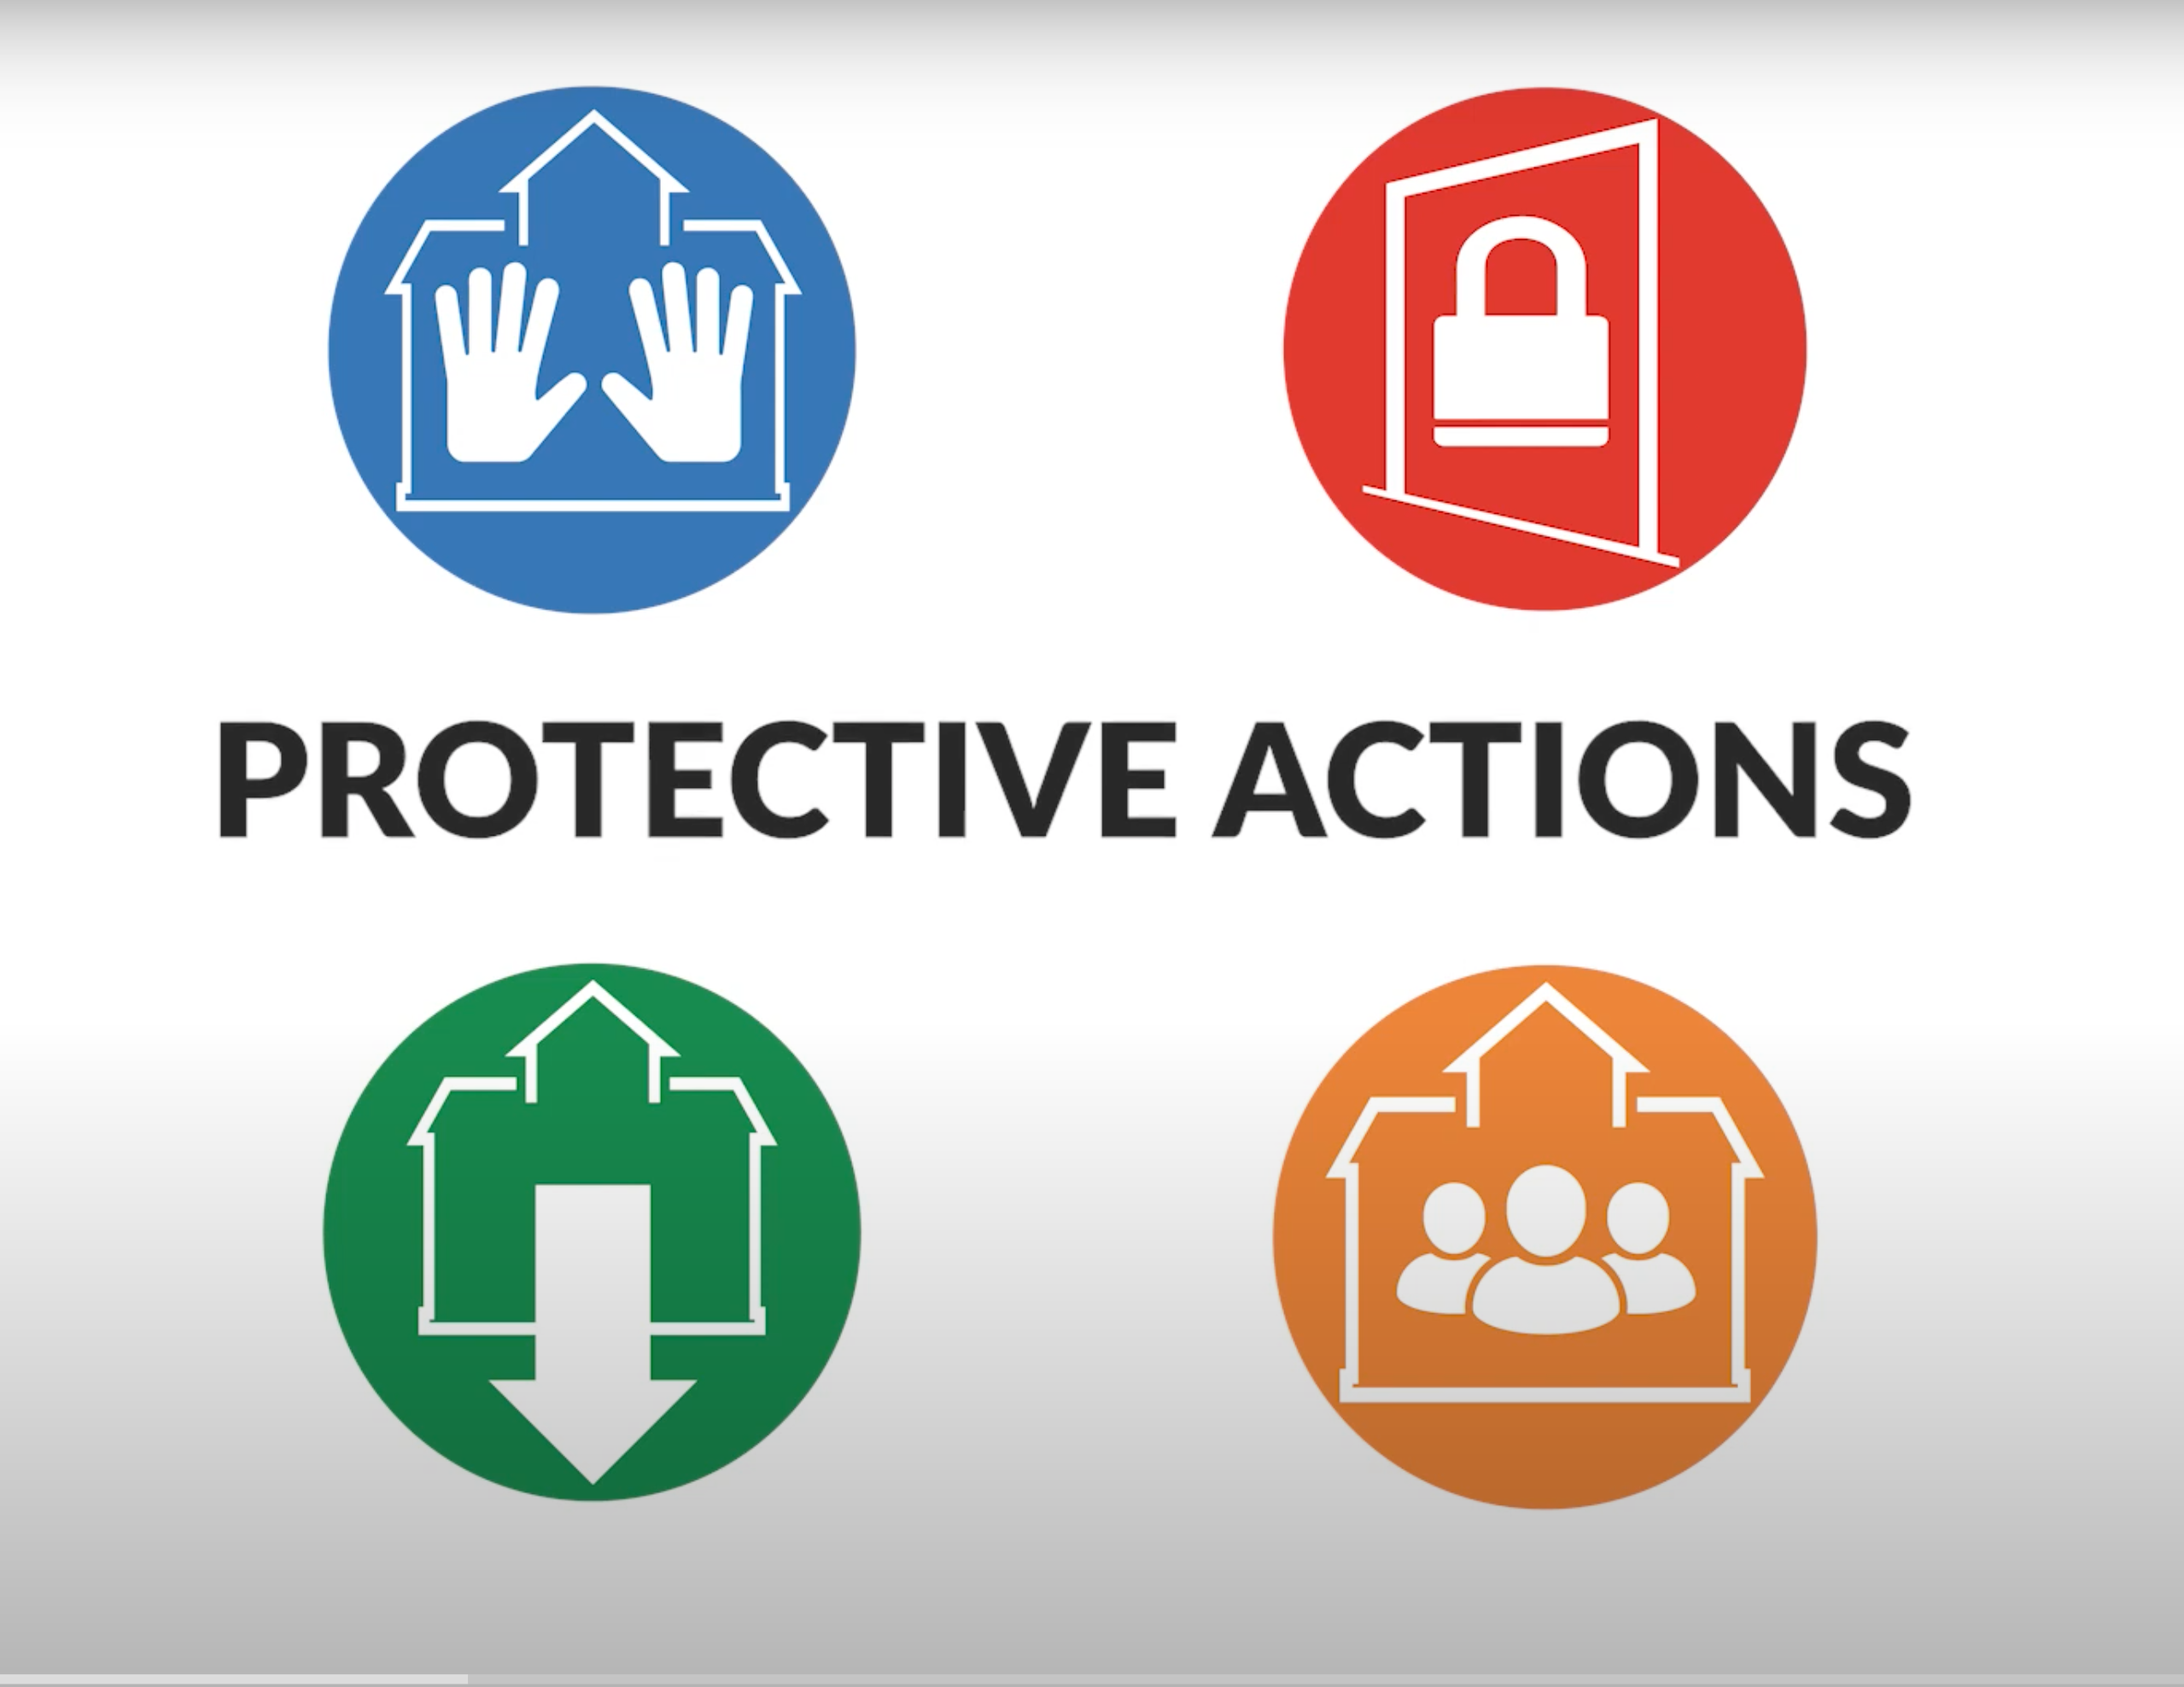 School Protective Actions Explained